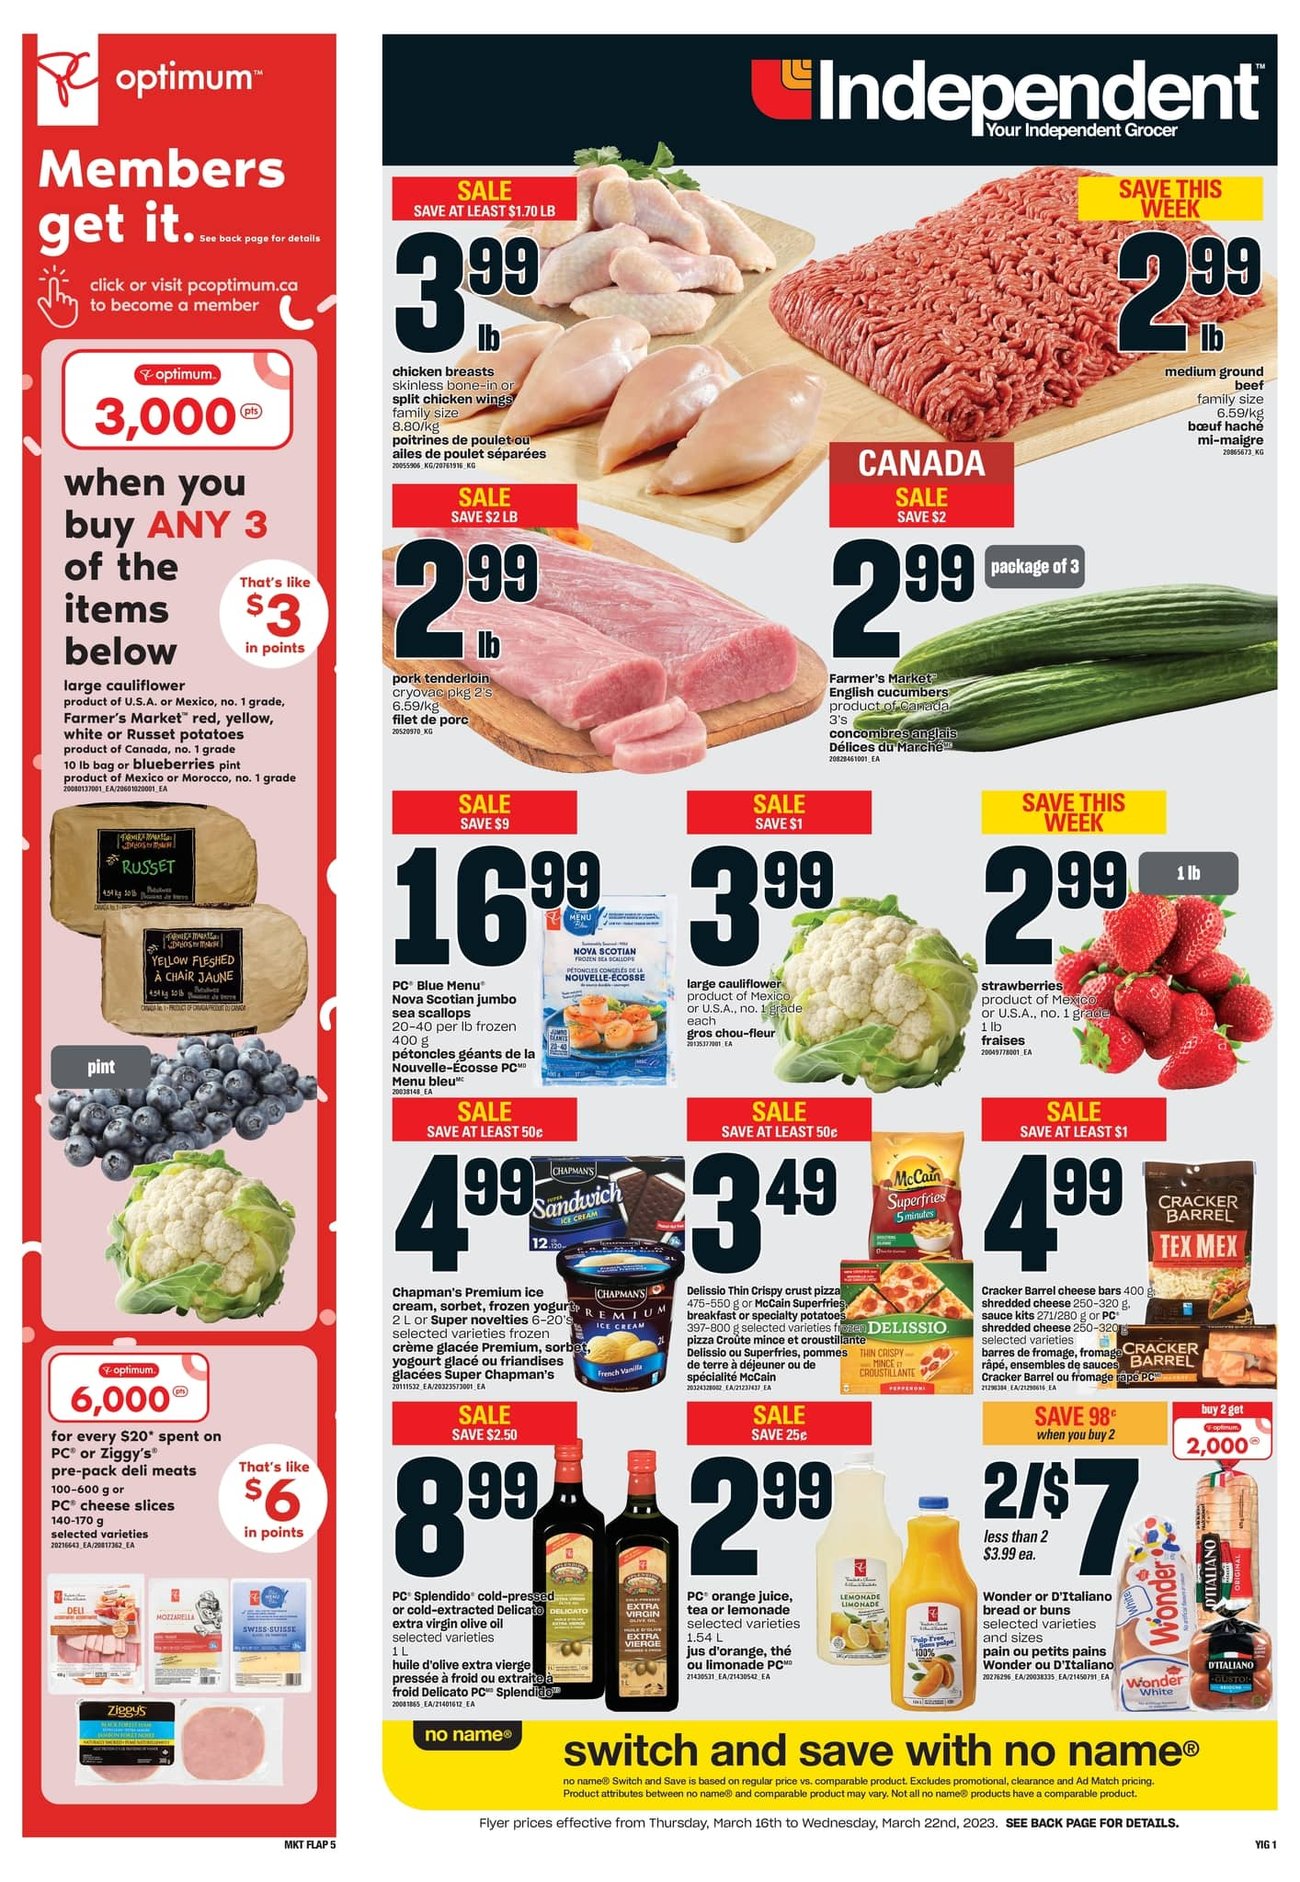 Independent - Ontario - Weekly Flyer Specials - Page 1